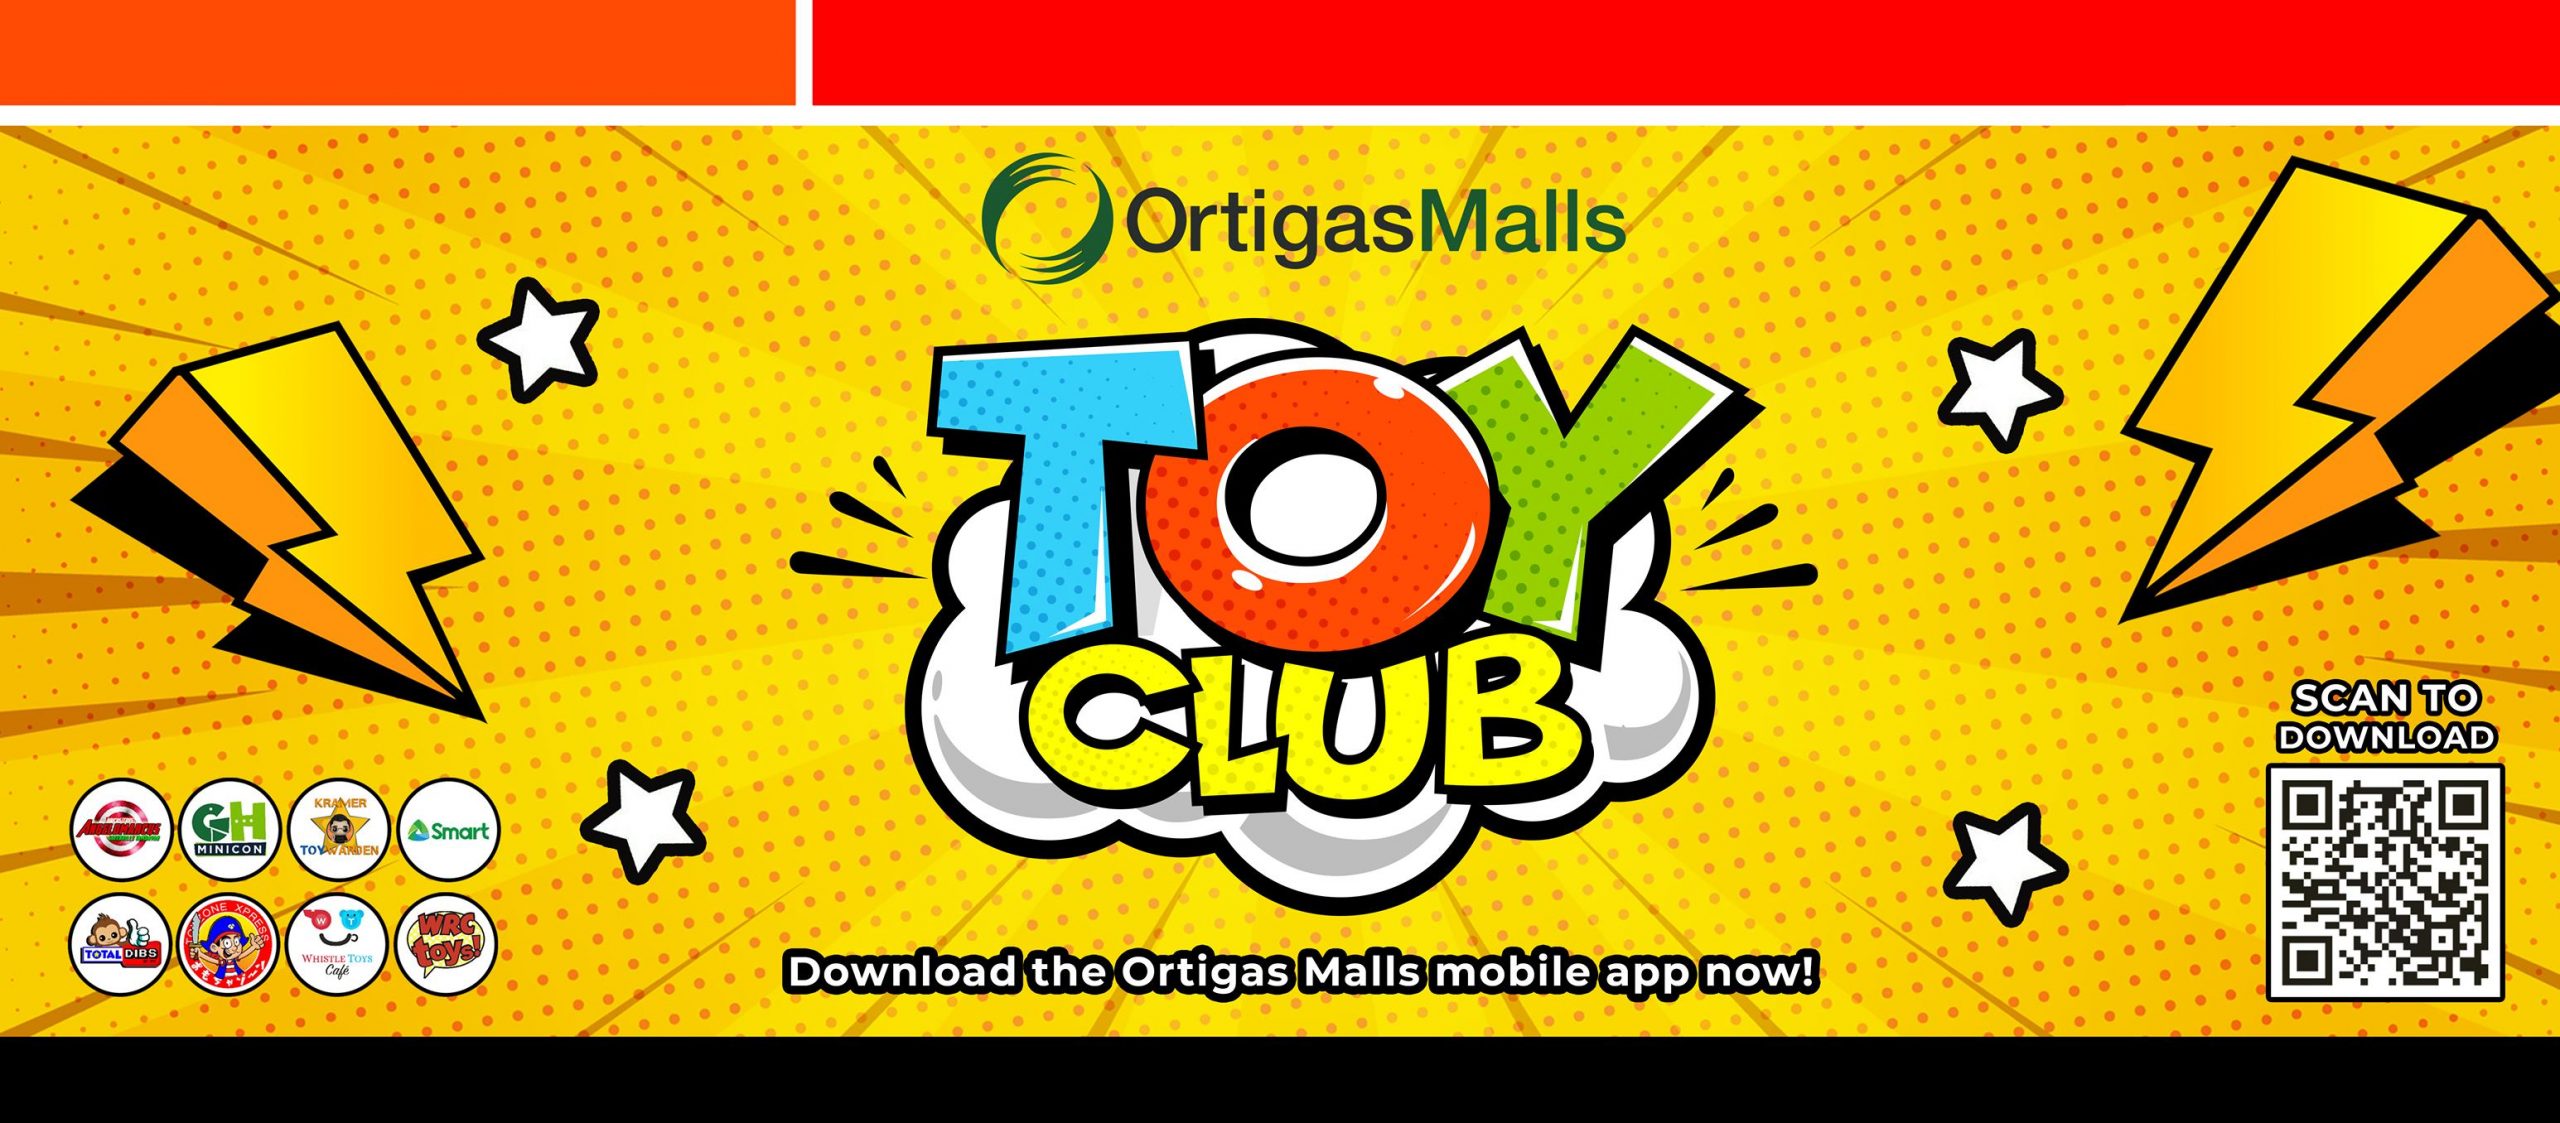 Ortigas Malls pioneers the first ever Toy Club for Pinoy Collectors